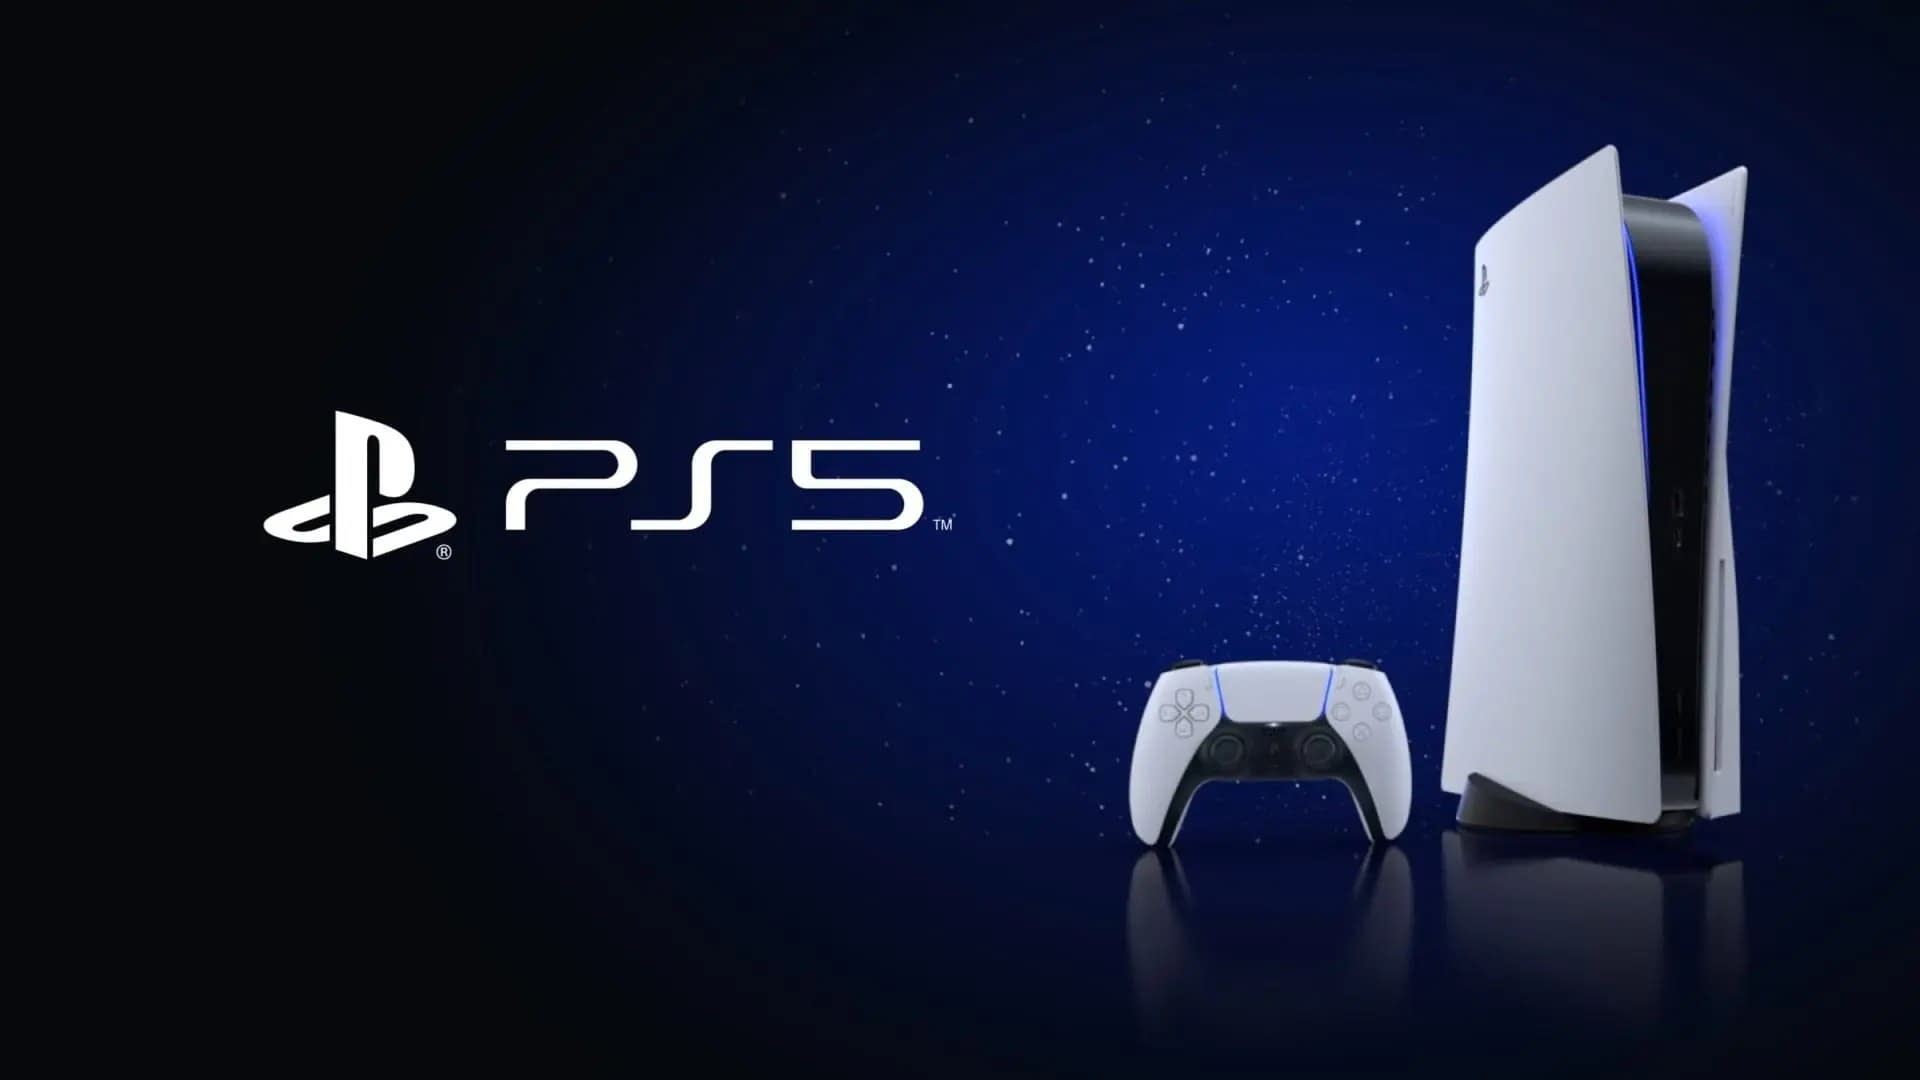 Playstation 5 Sales Updated: 41.7 Million!